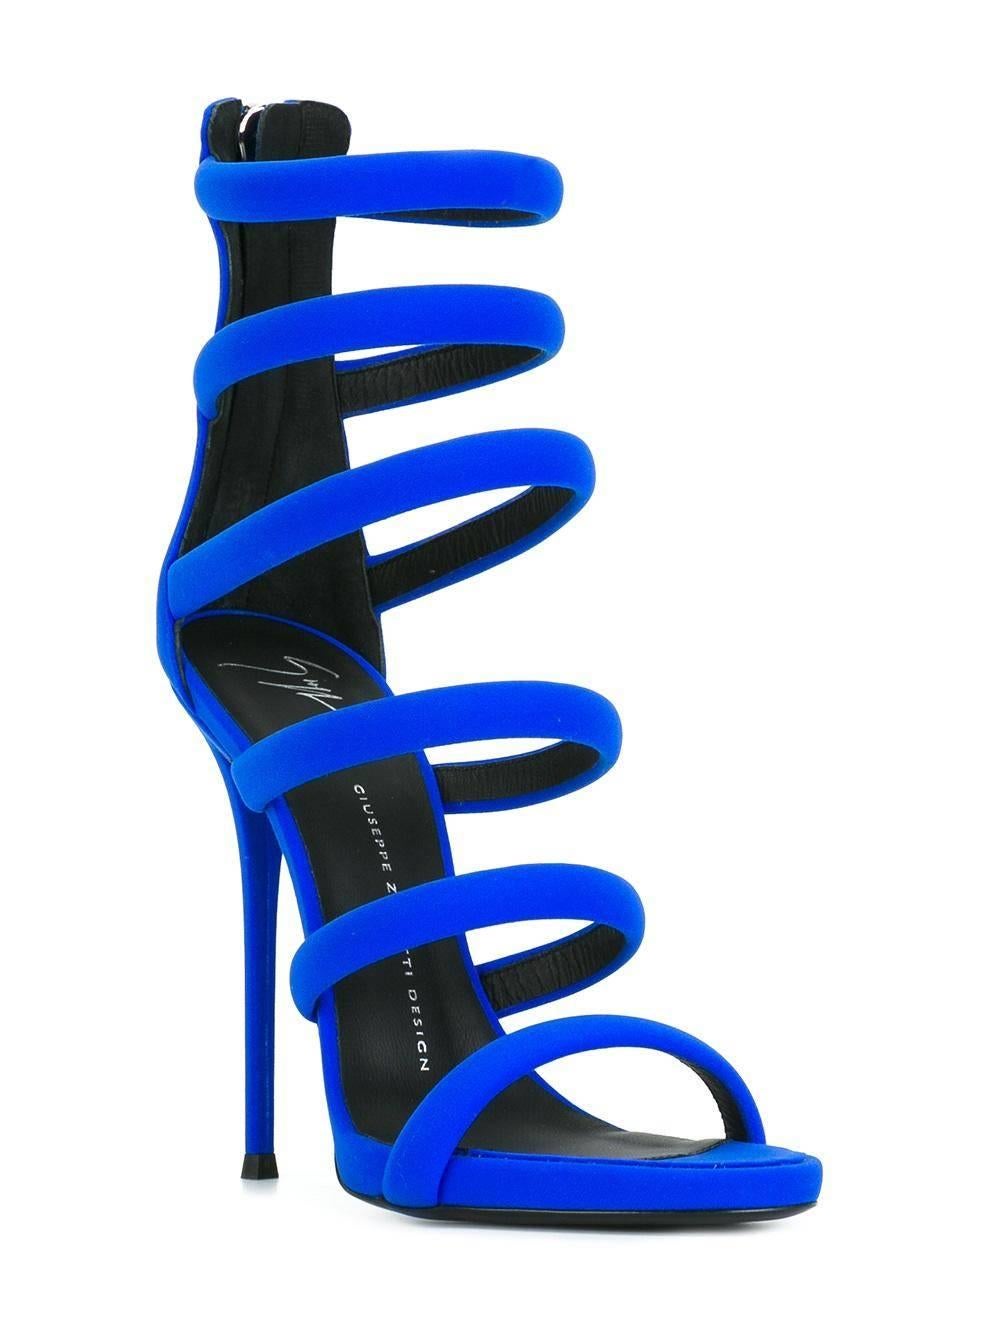 Giuseppe Zanotti New Blue Cut Out Strappy Heels Sandals in Box    

Size IT 36 
Scuba  
Nylon 
Zipper back closure
Made in Italy 
Heel height 4.5